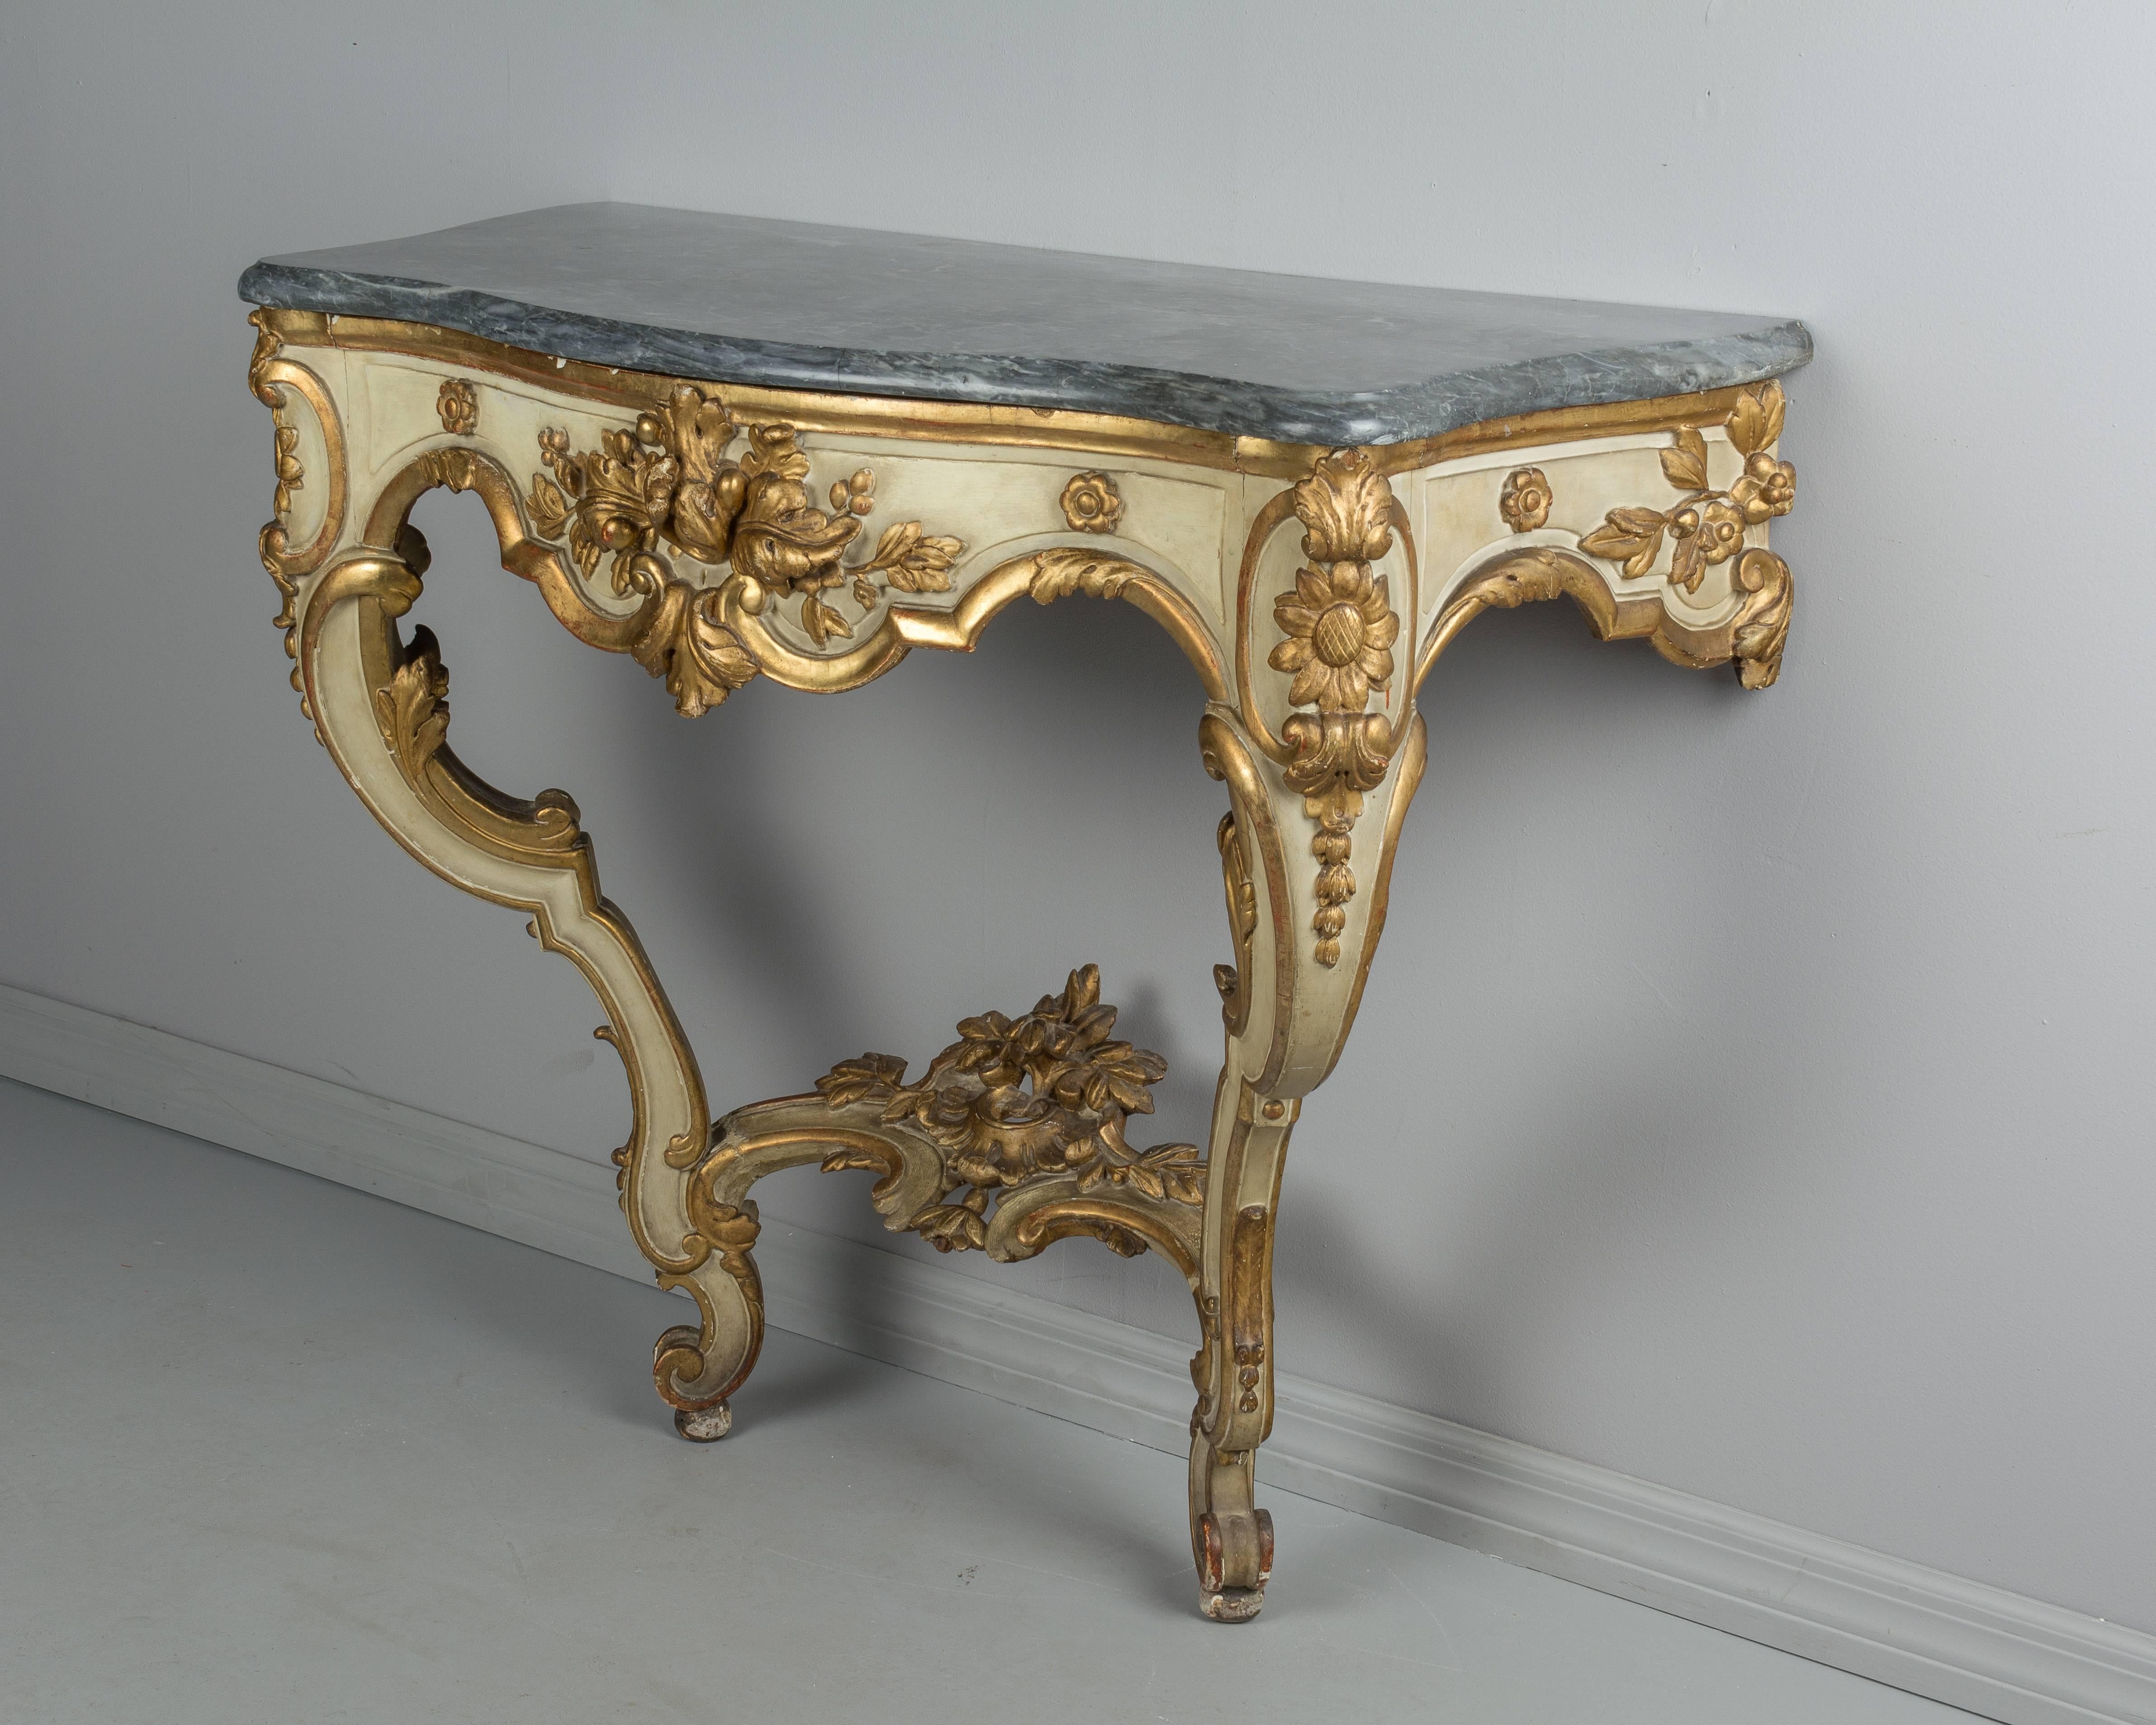 A 19th century Louis XV style parcel-gilt console with grey marble top. Richly detailed with beautiful gilded floral carvings against a pale verdigris painted surface. Bright gilt with only minor losses. Sturdy base is in excellent condition.